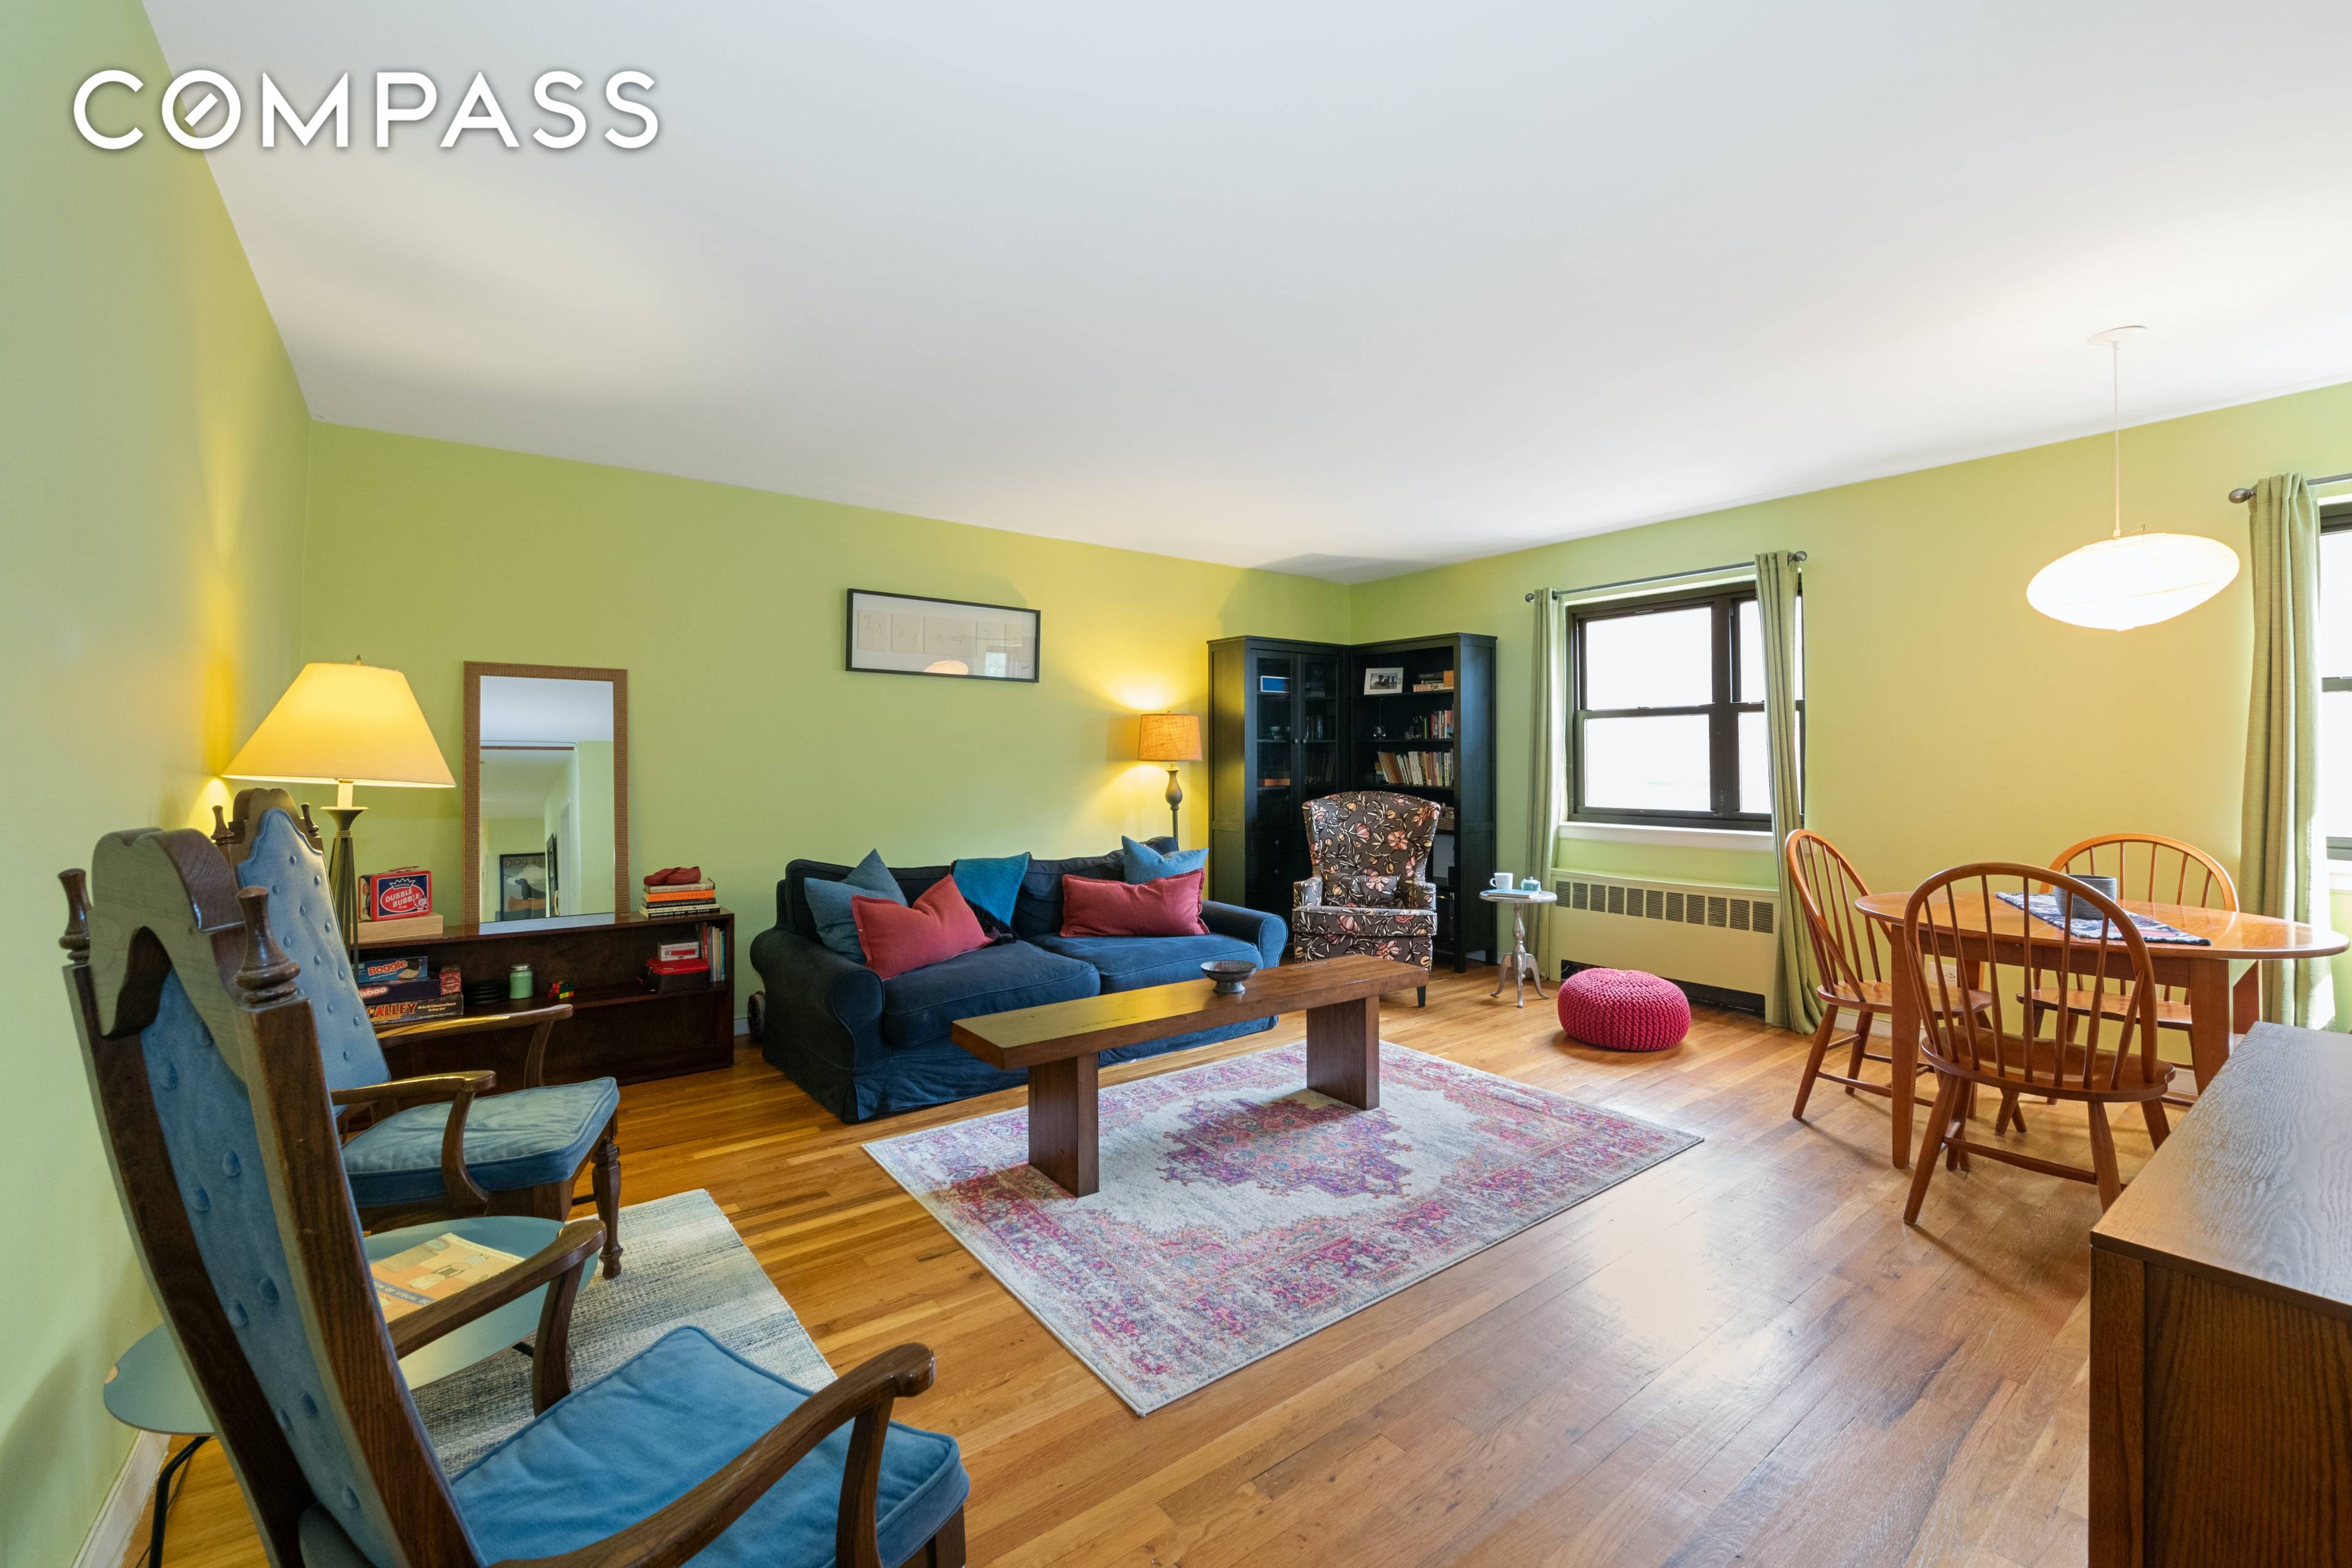 Post war meets modern chic in this spacious two bedroom one bath Coop.